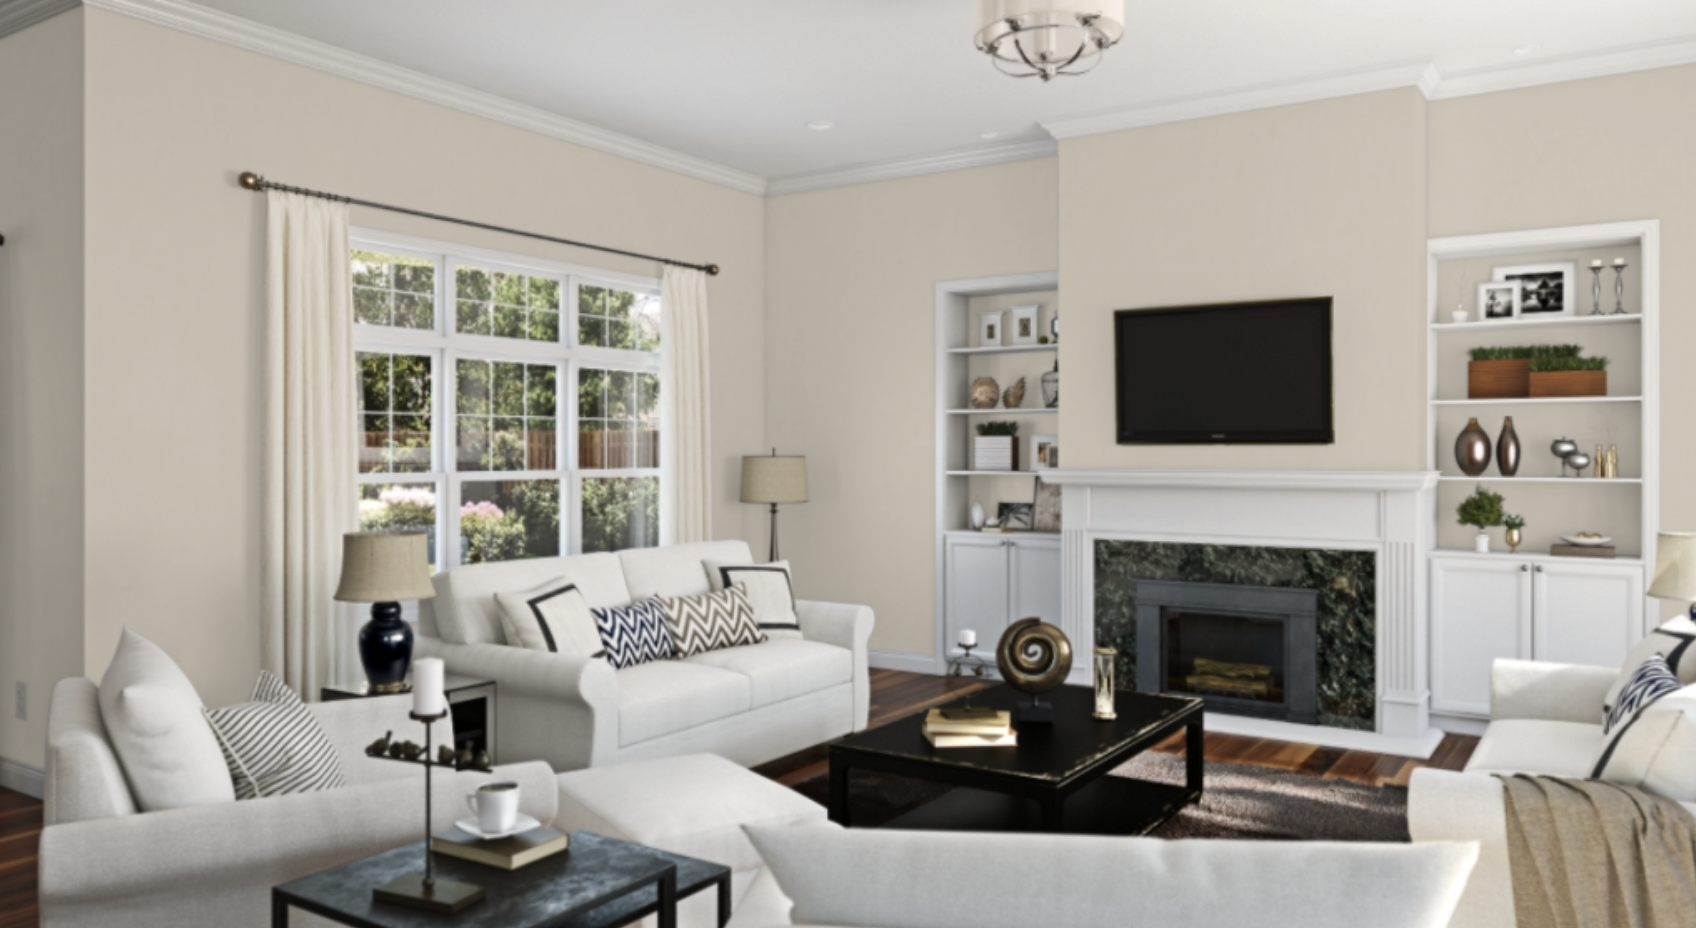 Sherwin Williams Accessible Beige living room